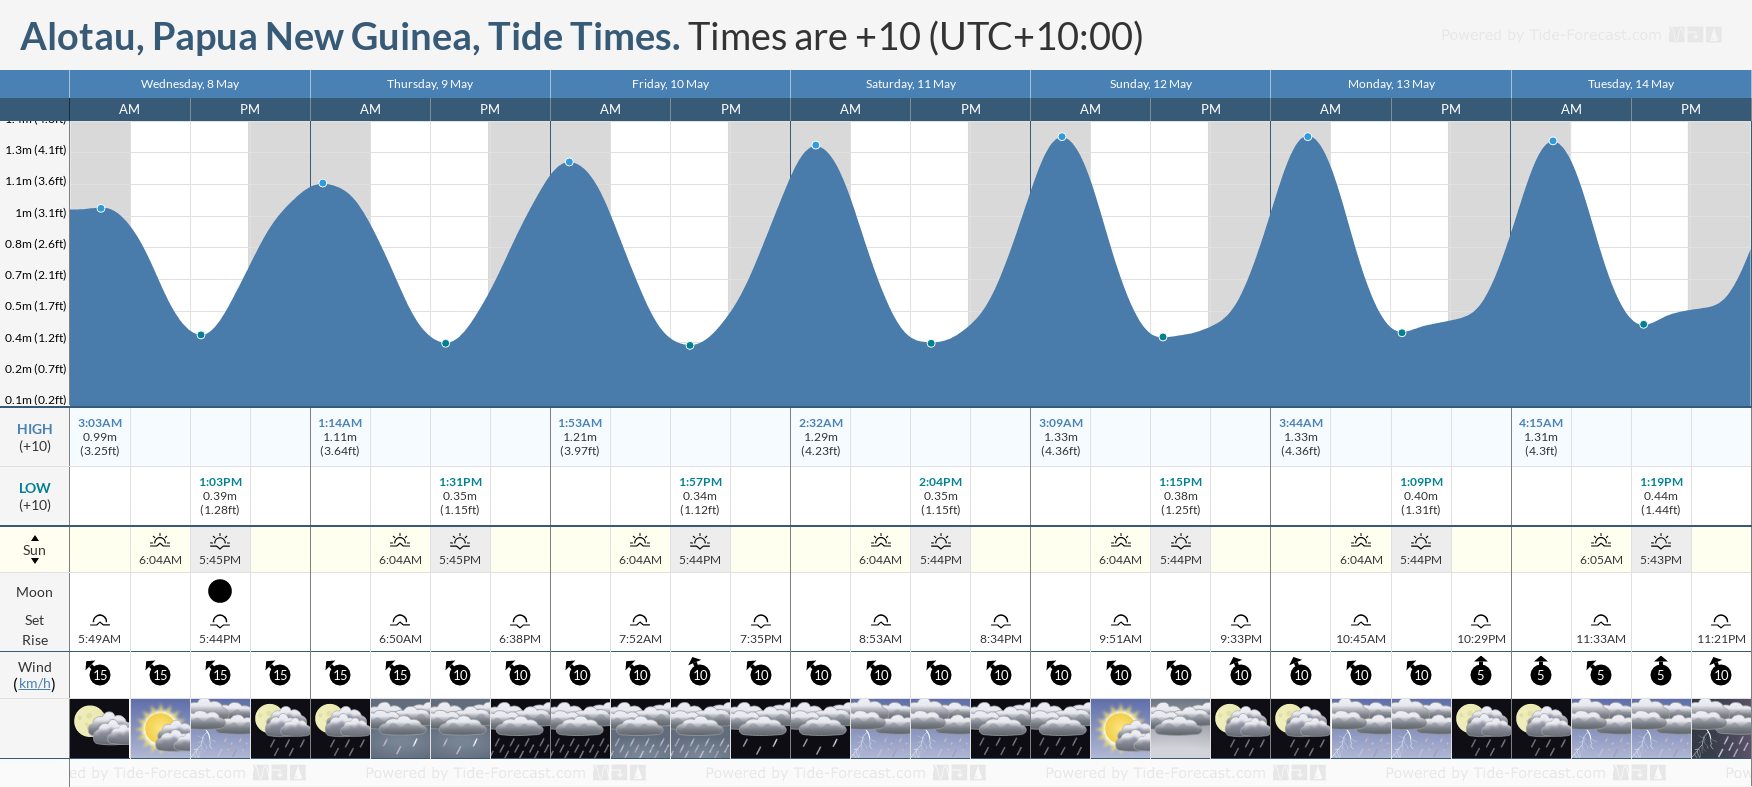 Alotau, Papua New Guinea Tide Chart including high and low tide tide times for the next 7 days